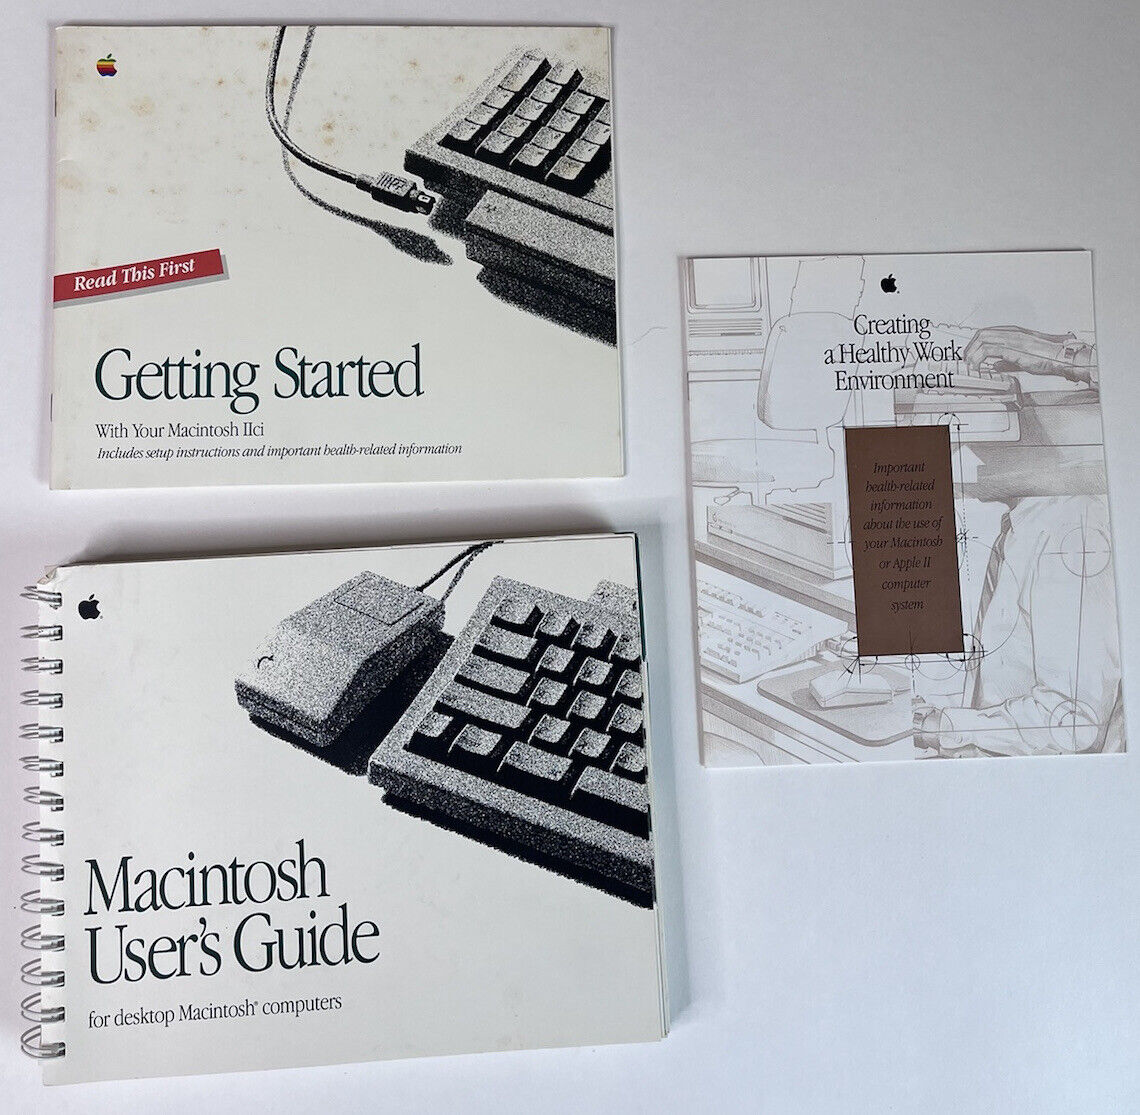 Macintosh Apple Owners Manuals 1991 Getting Started User's Guide Health Booklet